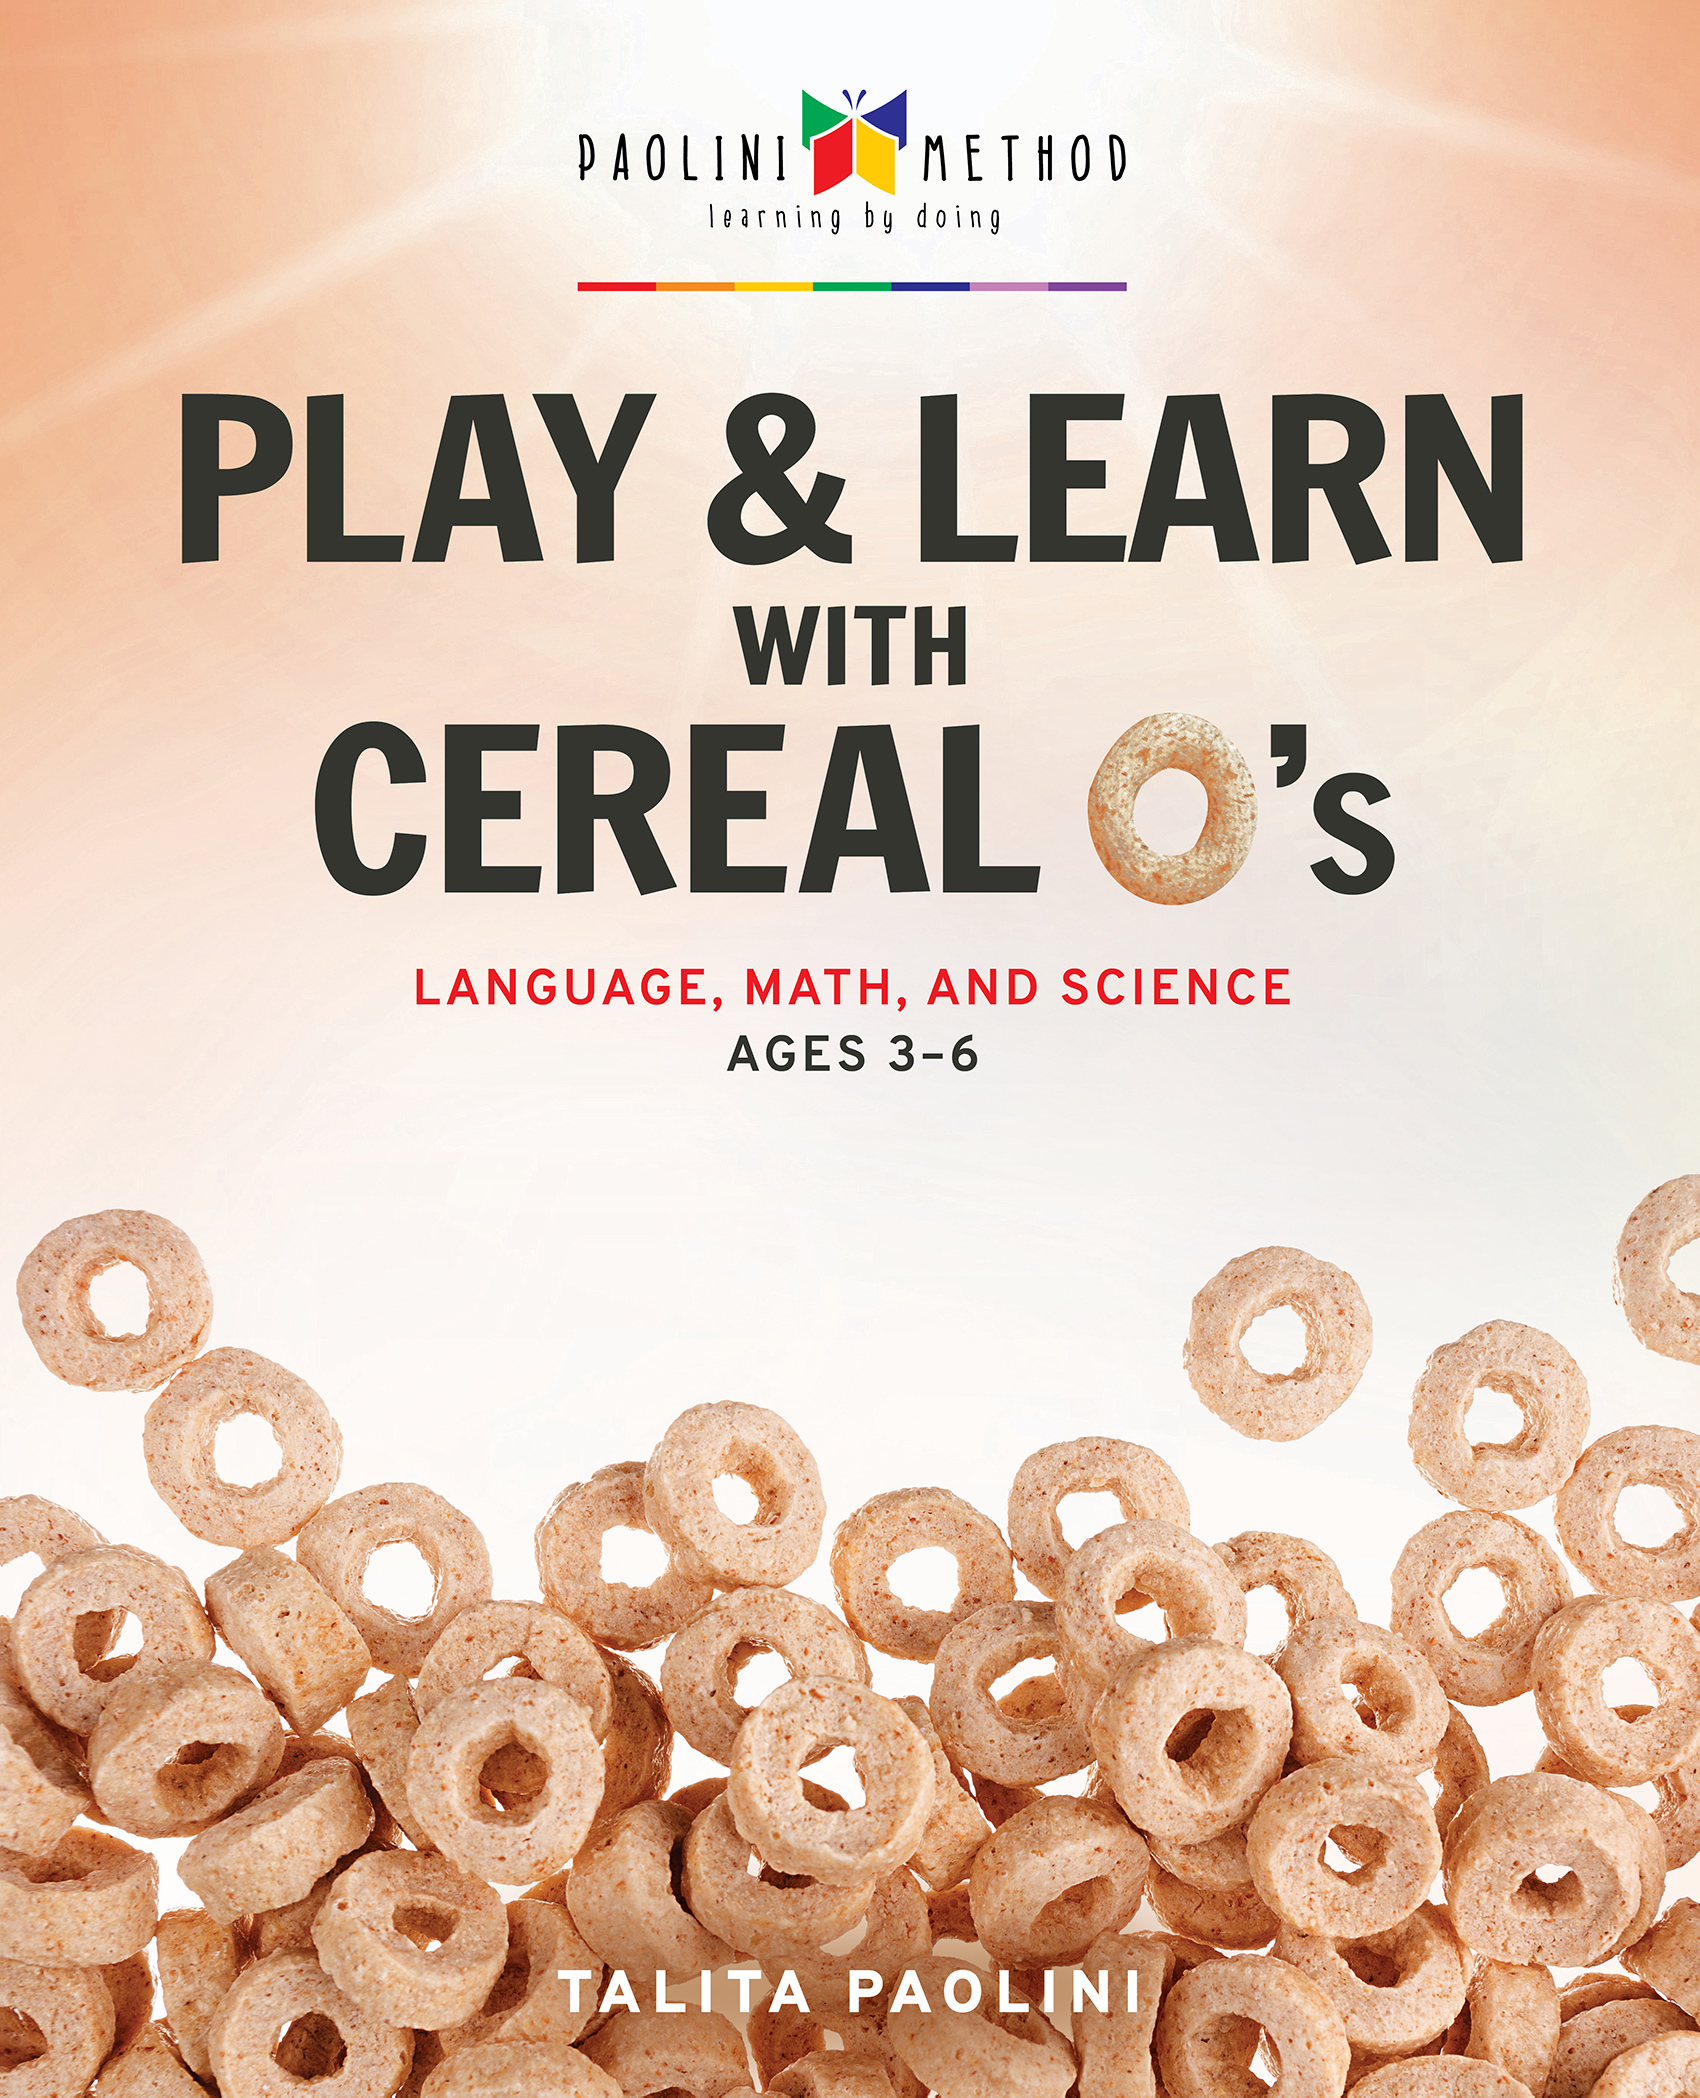 Play and Learn with Cereal O's, by Talita Paolini